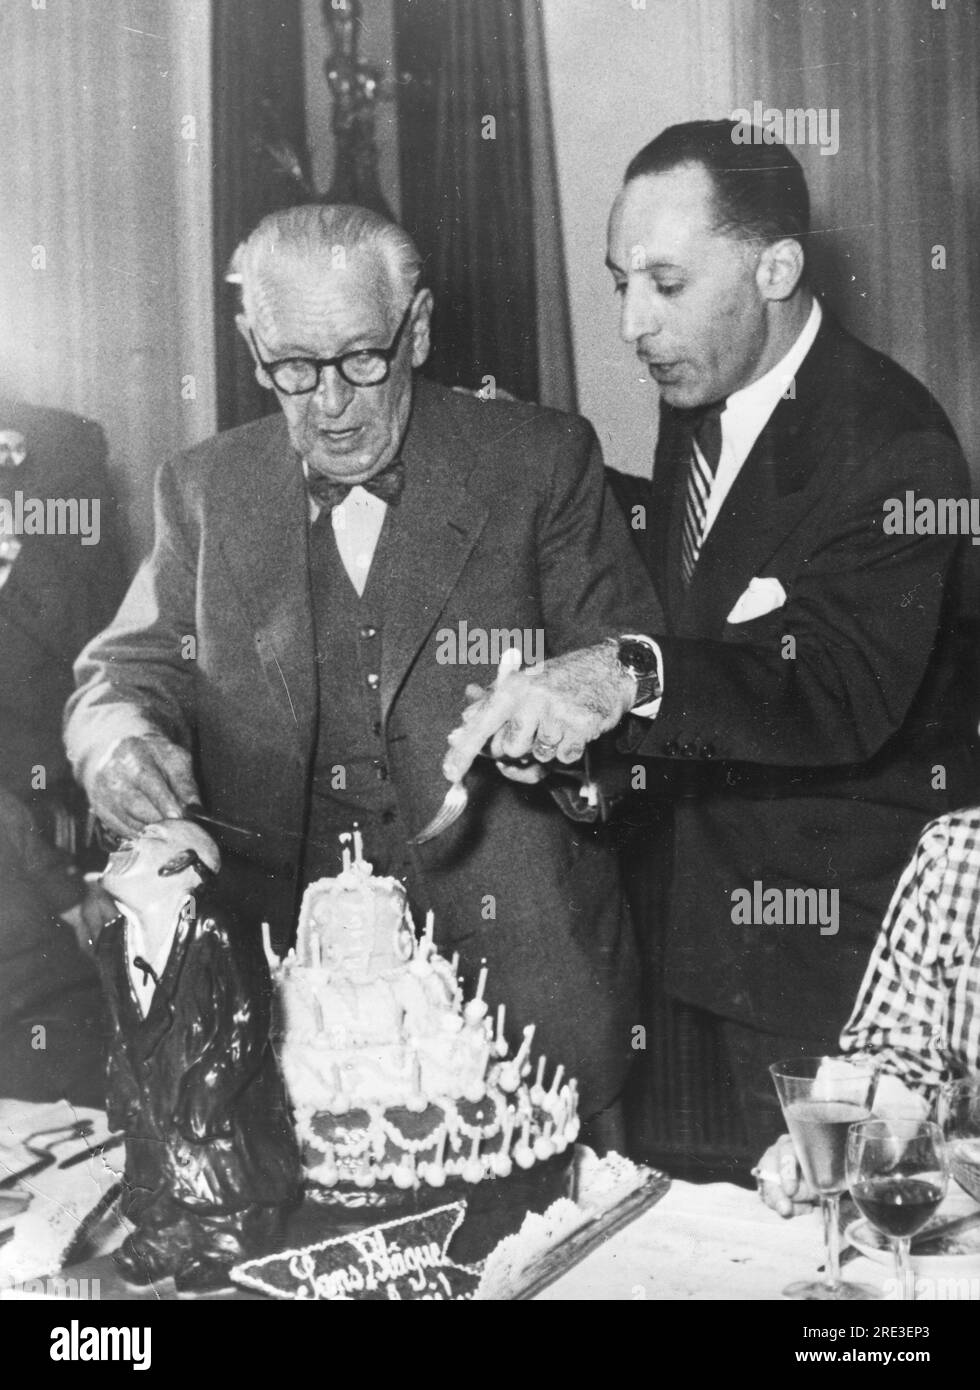 Grock, 10.1.1880 - 14.7.1959, Swiss clown, 72th birthday, slices the birthday cake, Paris, 10.1.1952, ADDITIONAL-RIGHTS-CLEARANCE-INFO-NOT-AVAILABLE Stock Photo